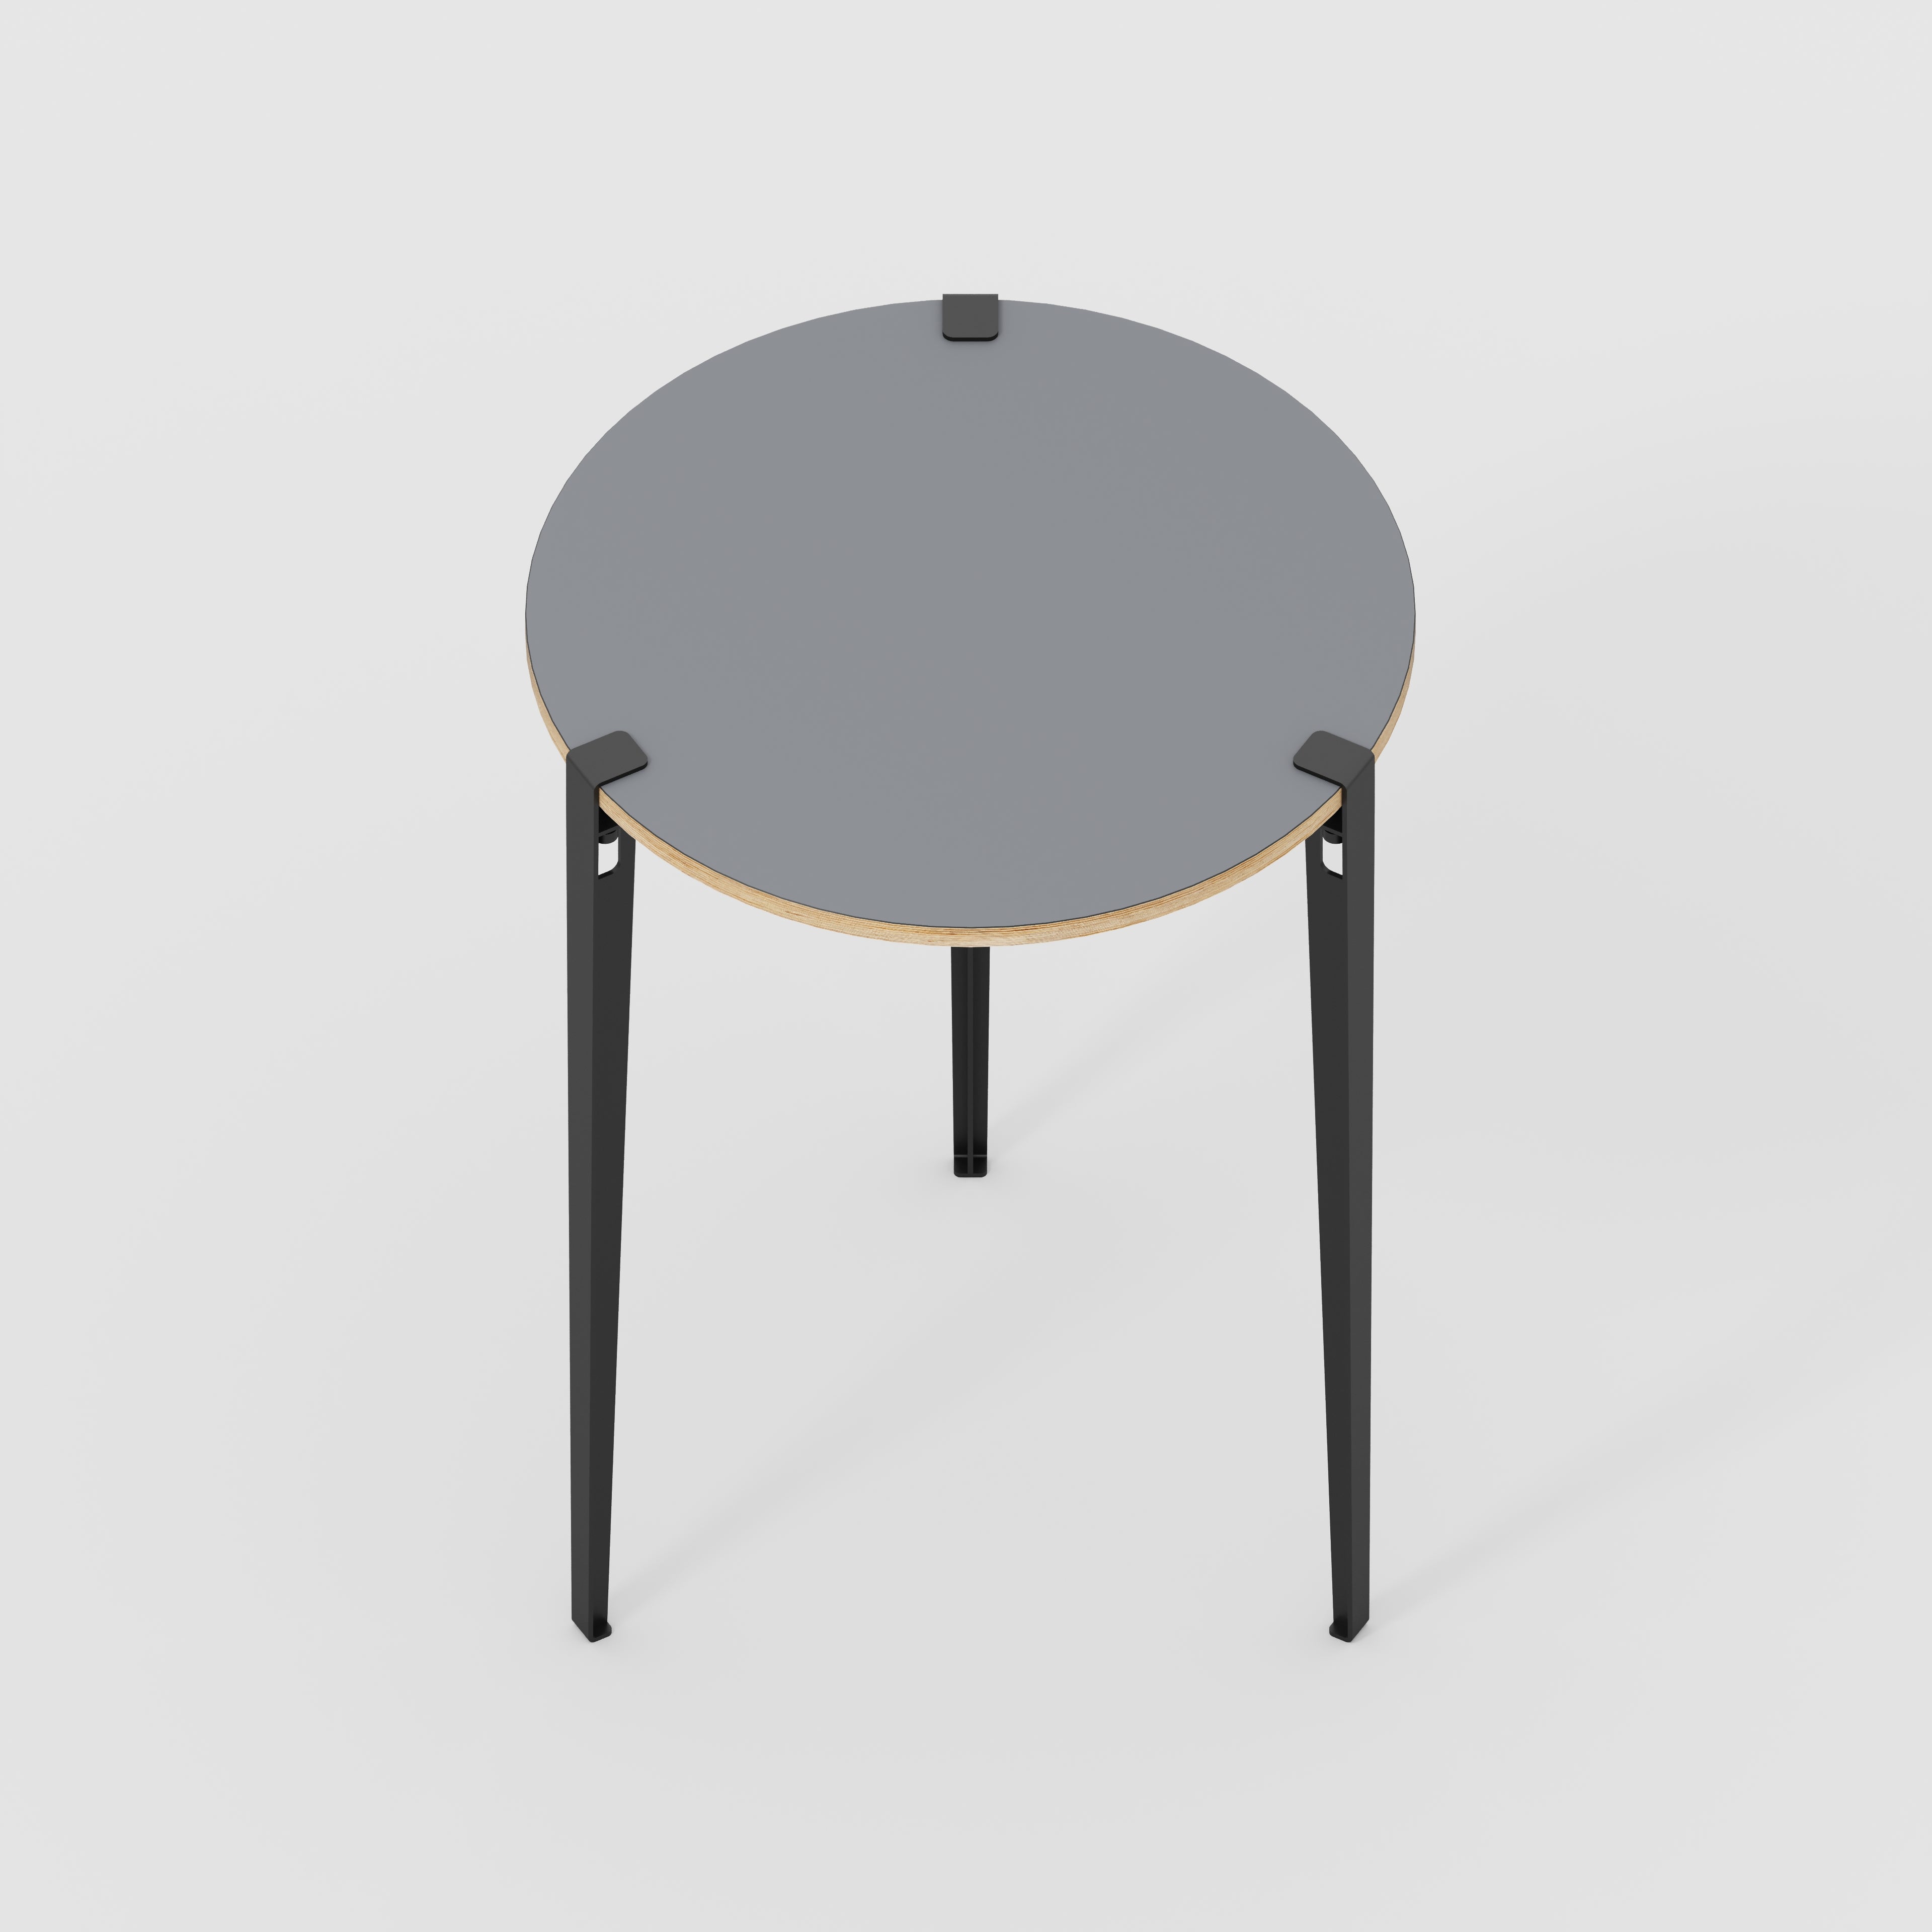 Round Table with Black Tiptoe Legs - Formica Tornado Grey - 800(dia) x 1100(h)